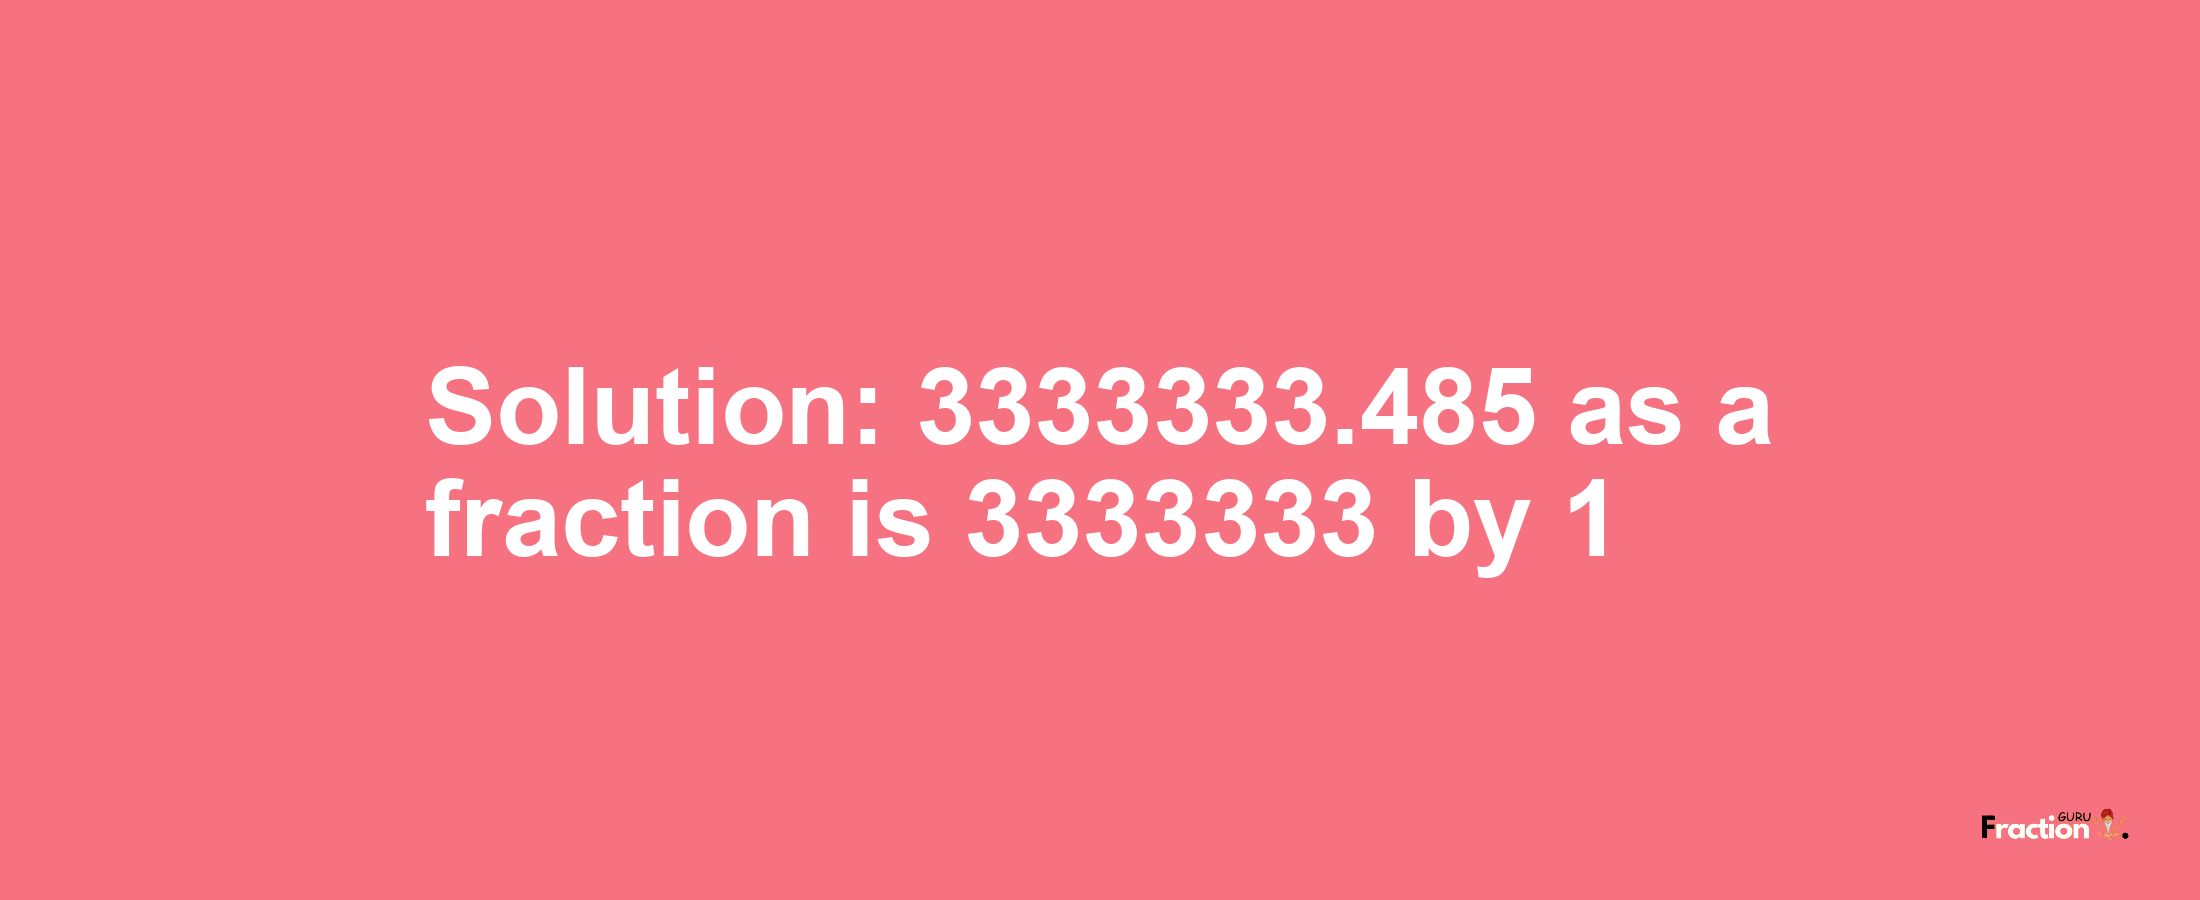 Solution:3333333.485 as a fraction is 3333333/1